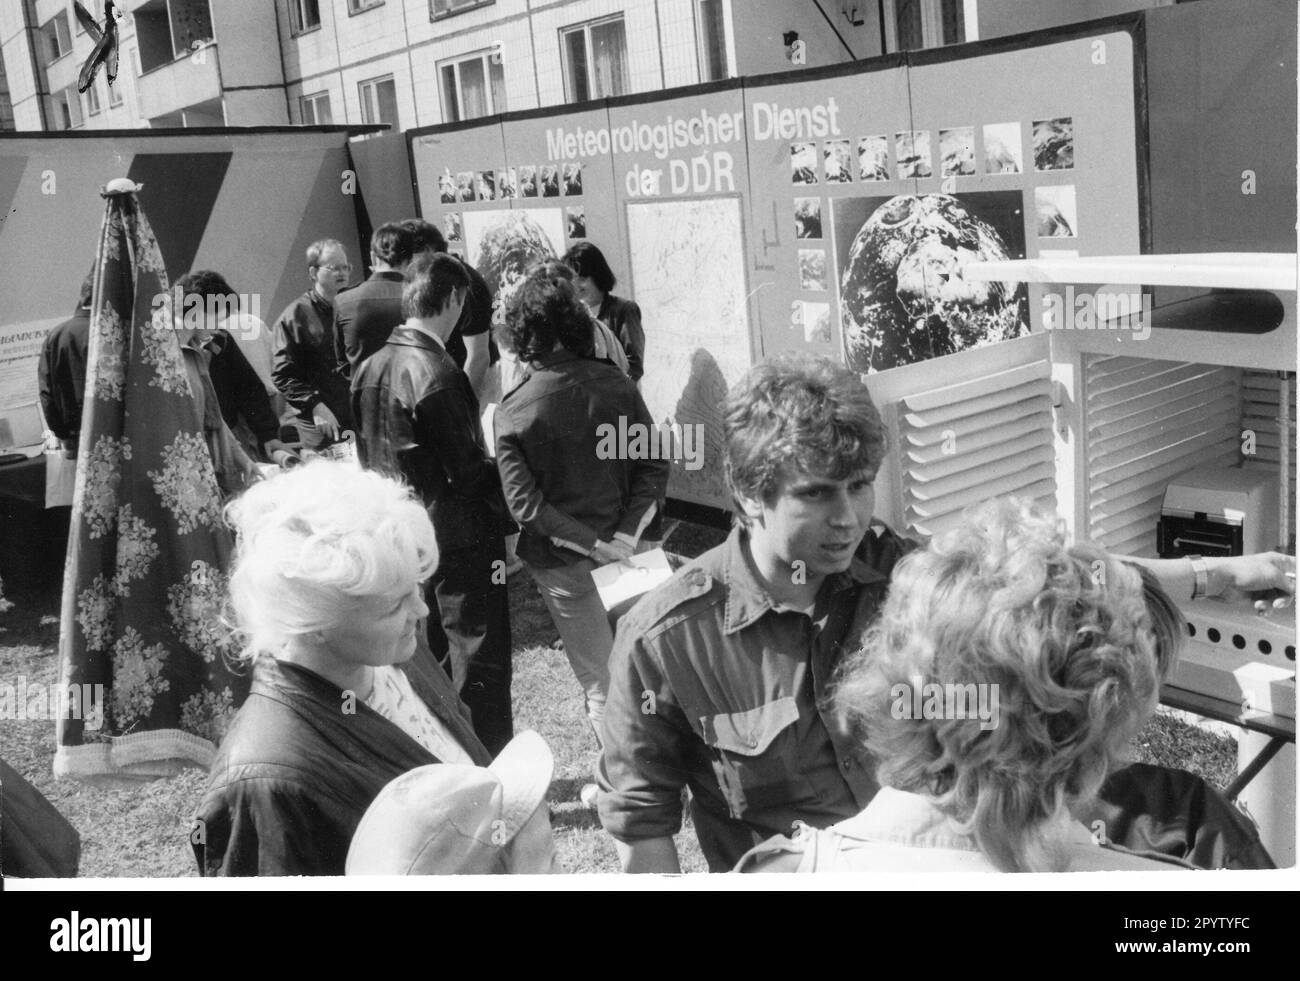 From 12 to 14 May 1989, the Pentecost meeting of the Free German Youth (FDJ) took place in East Berlin. The Potsdam Meteorological Service provides information to all interested parties. Wende. Turning point. GDR. Photo:MAZ/Christel Köster, 14.05.1989 [automated translation] Stock Photo